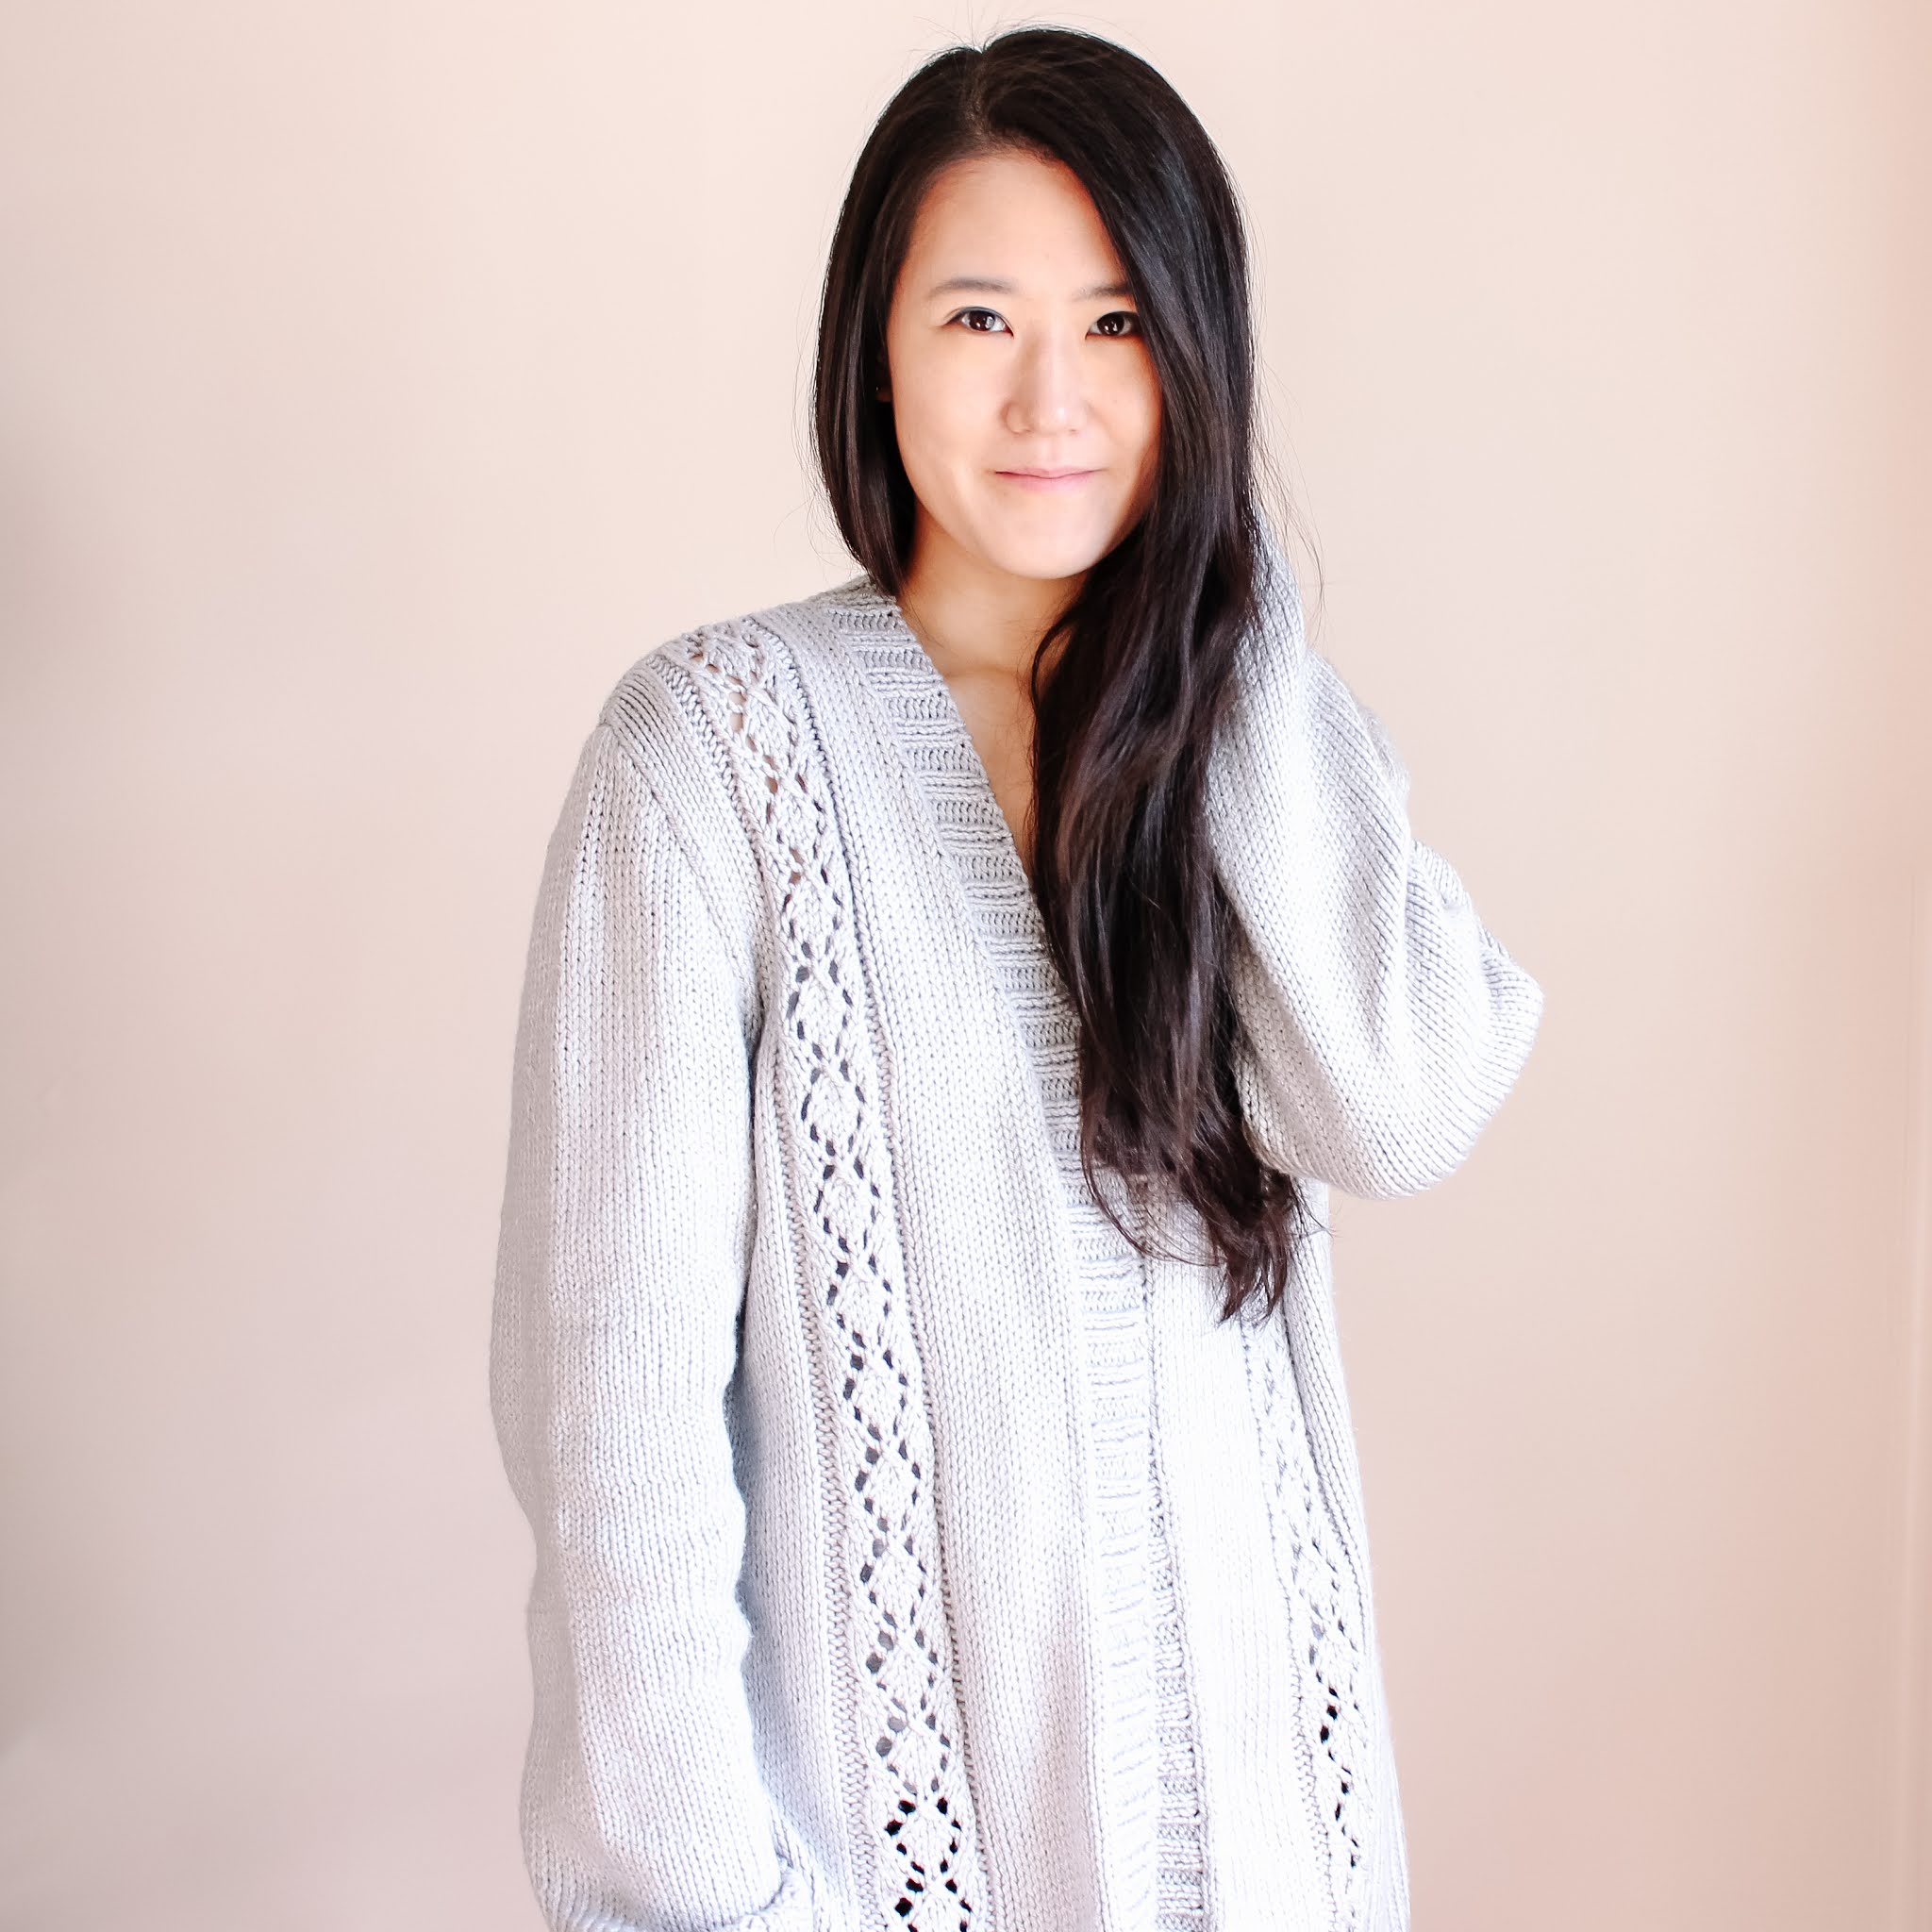 Designer of Modesty by Laura wearing the knit Silver Lining Cardigan.